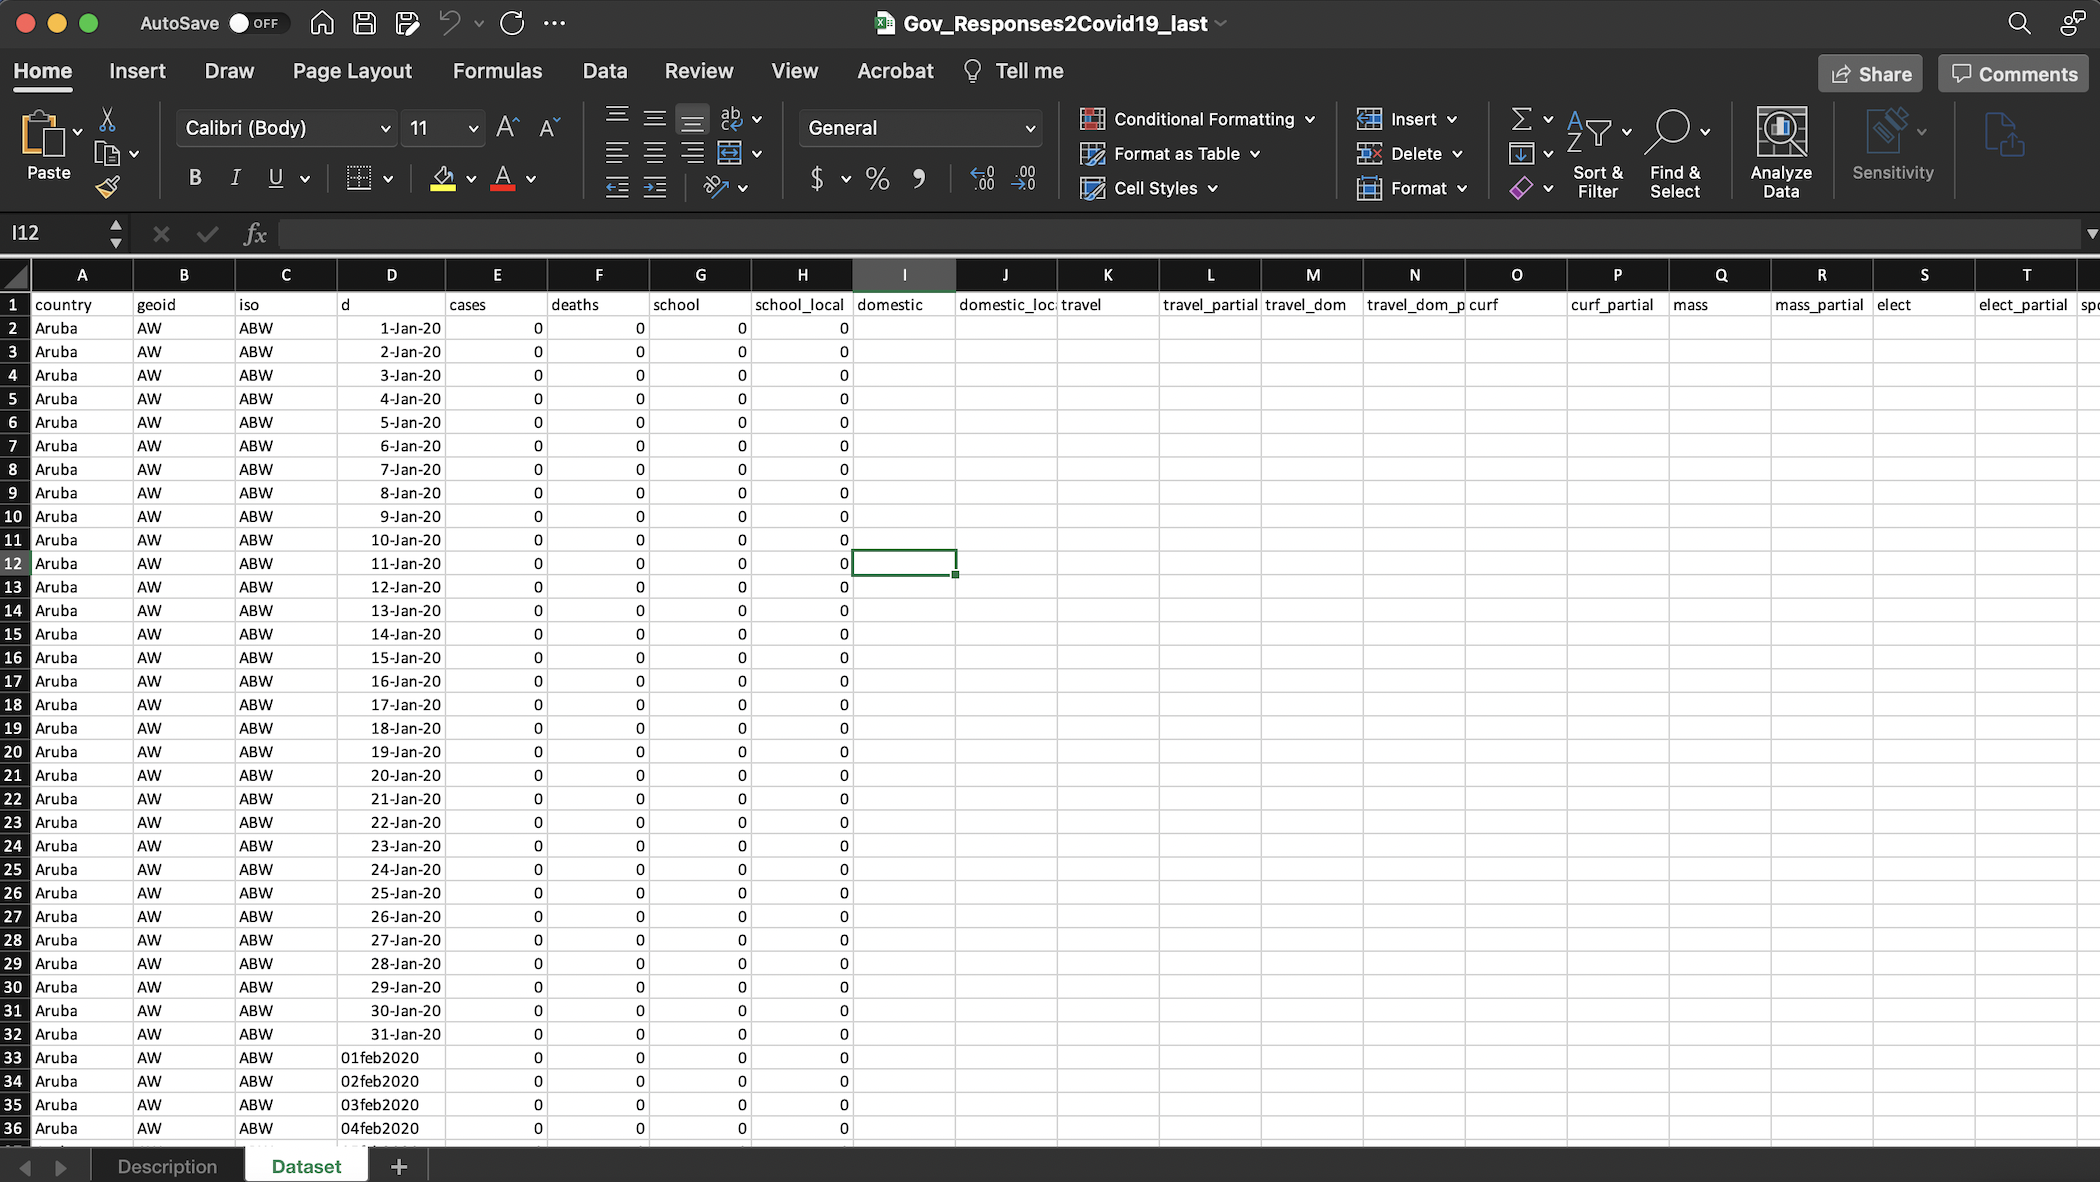 Screenshot of original ICPSR dataset displayed in spreadsheet software with the dataset tab open and showing rows and columns of data